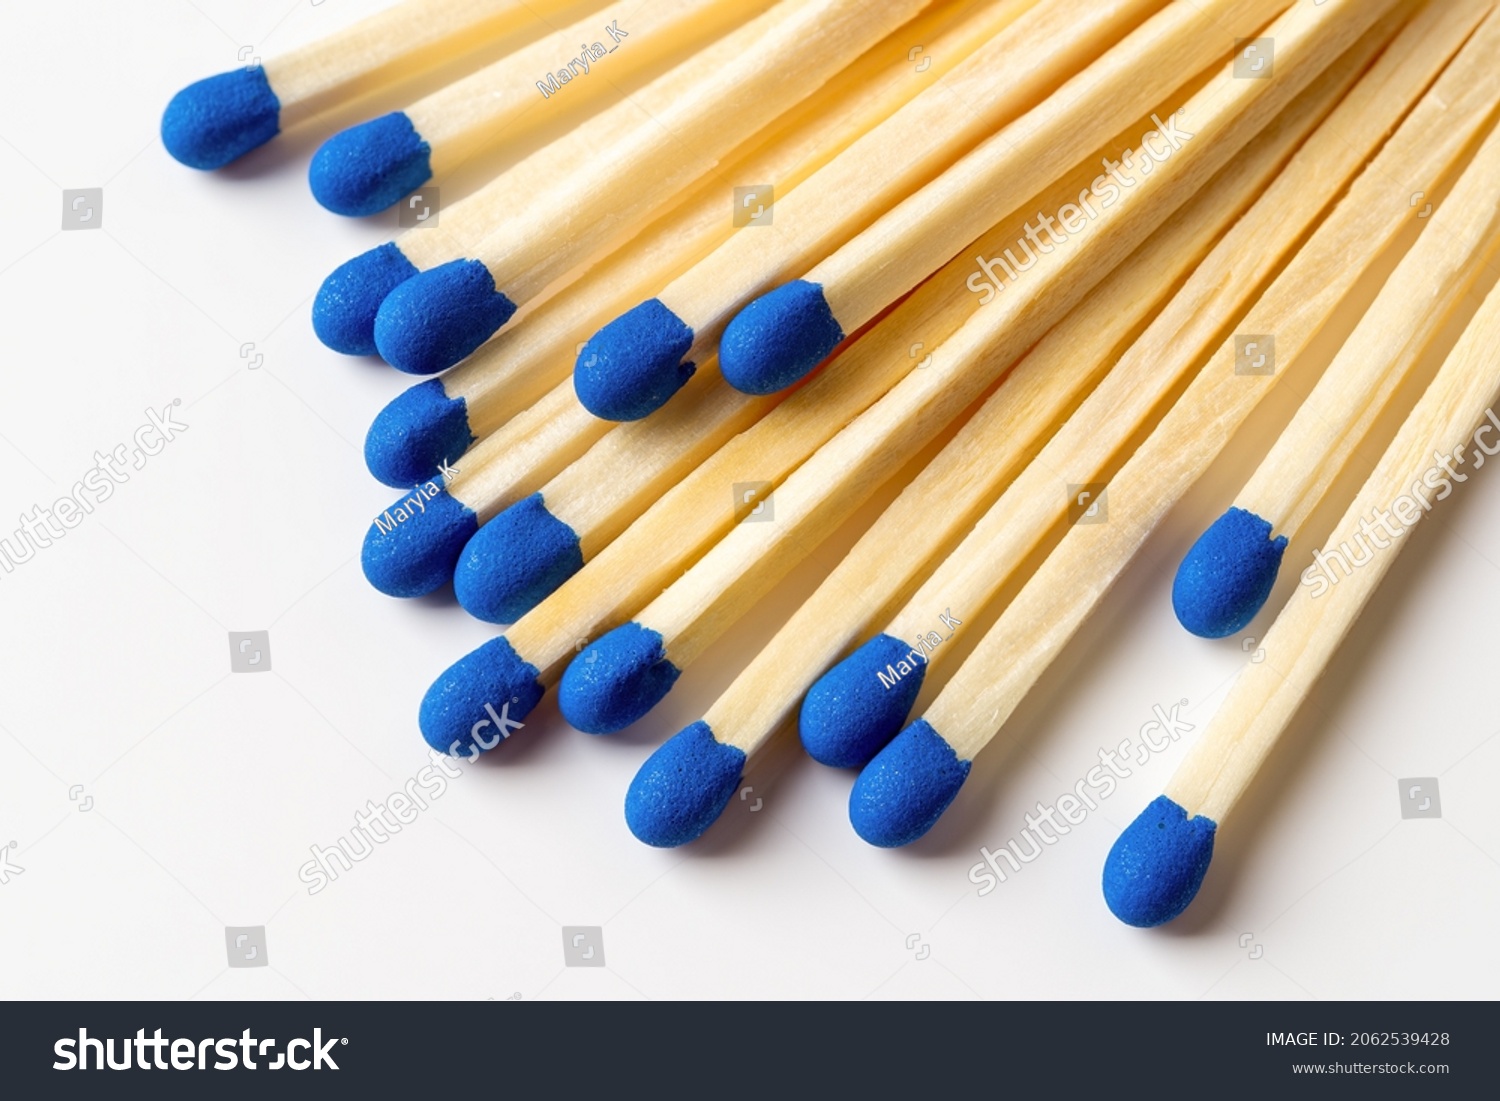 Blue wooden matches on a light gray background. Matchsticks with bright blue heads macro. Scattered wooden matches without box close-up. Design element for smoker accessory concept. Top view. #2062539428